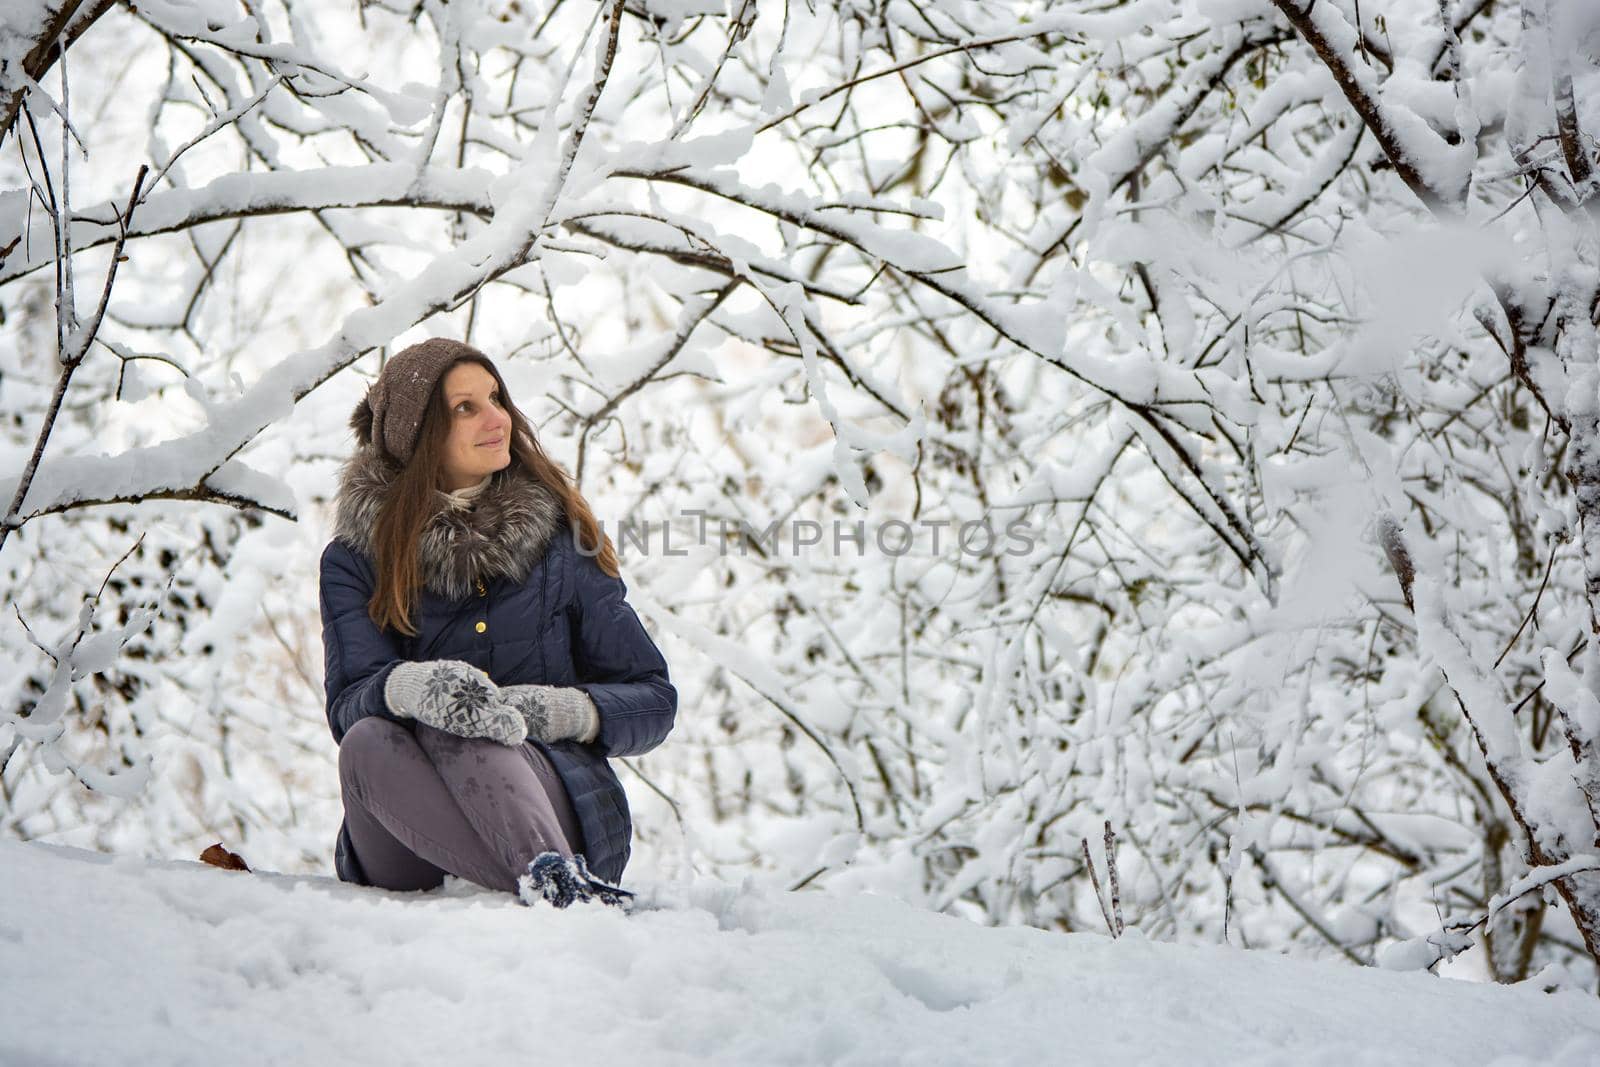 The girl sat down in a beautiful snowy forest and admires the beauty